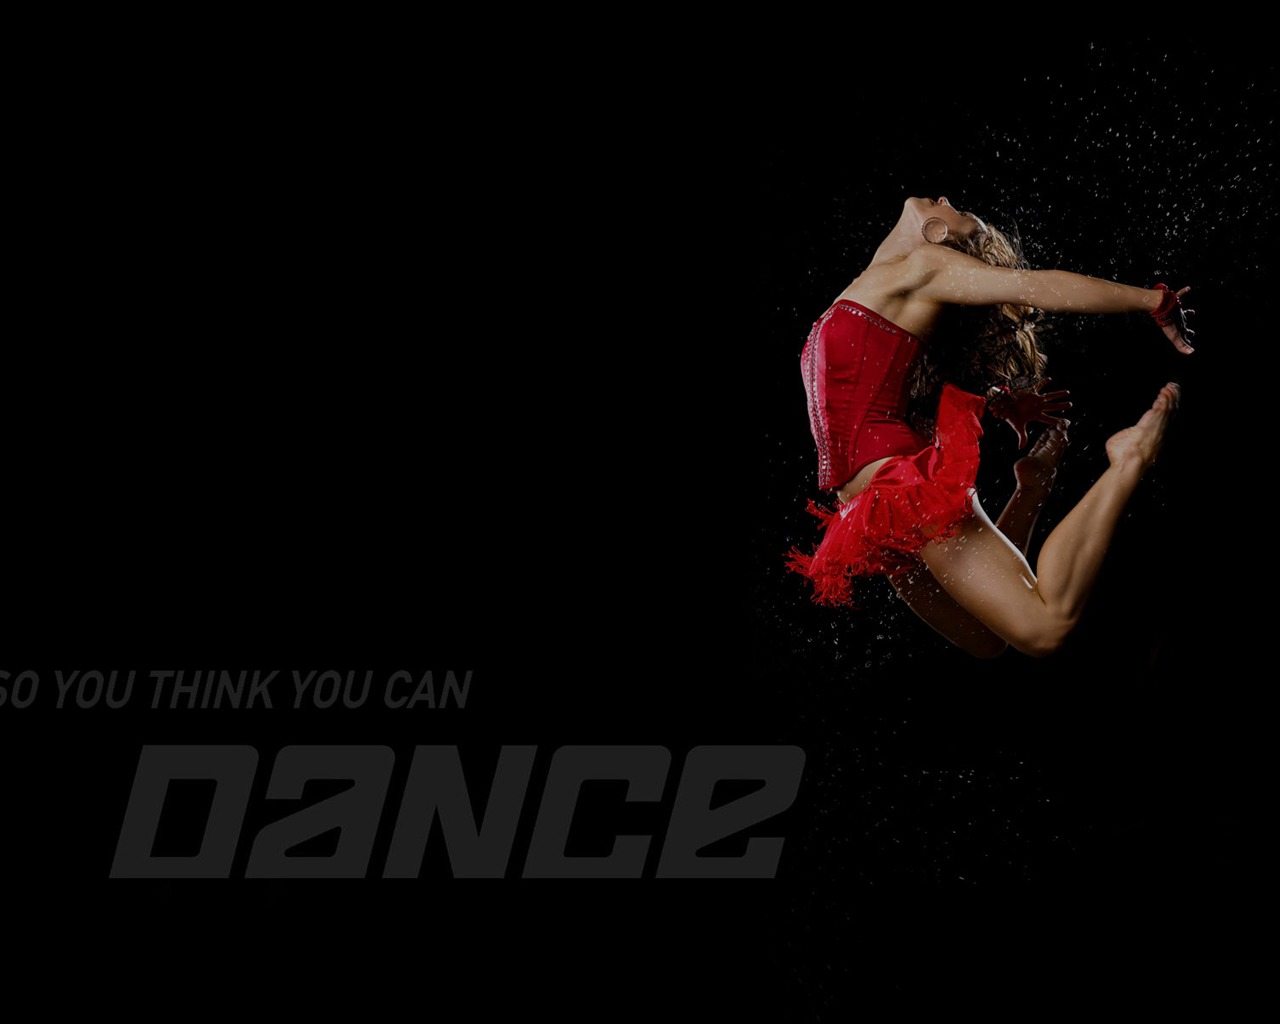 So You Think You Can Dance 舞林爭霸壁紙(二) #1 - 1280x1024